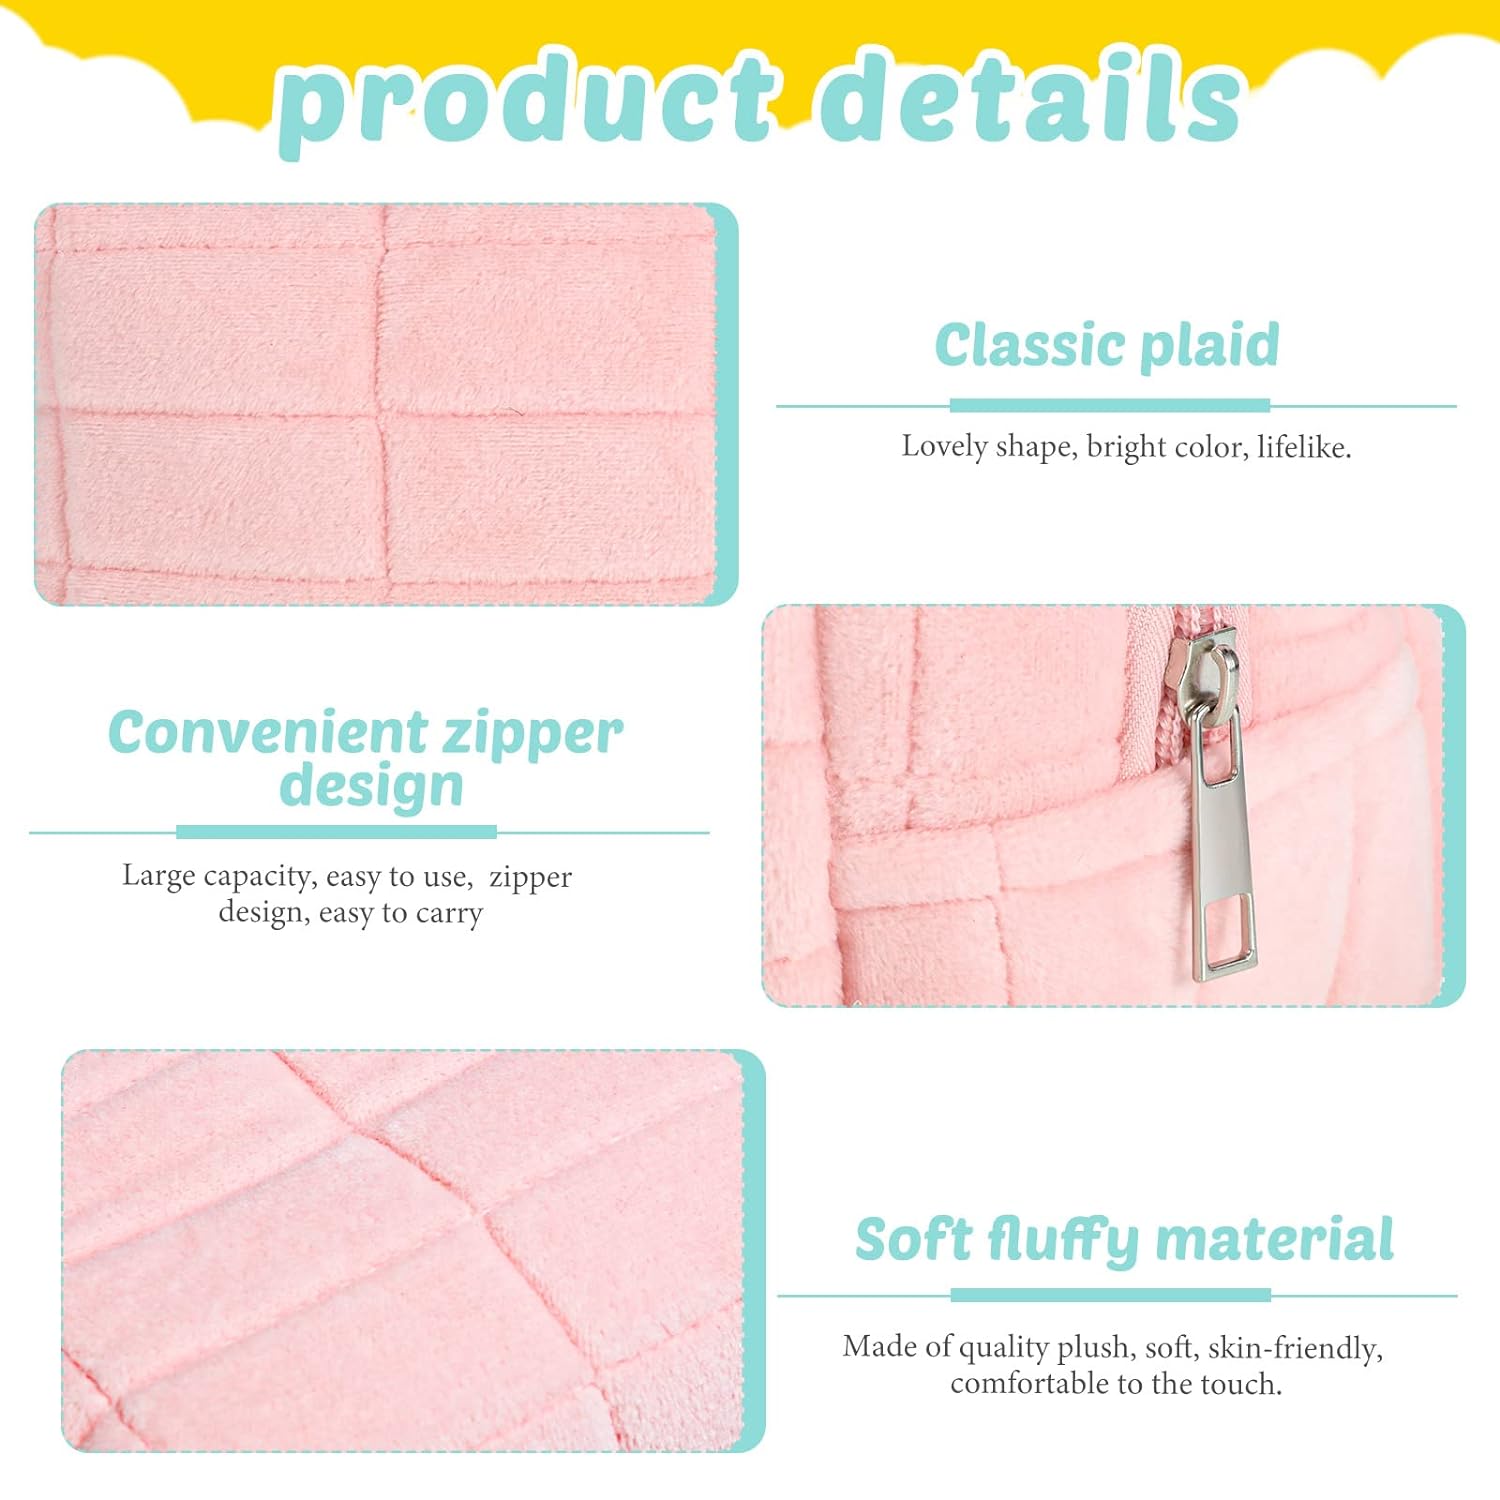 SkyShopy 1 Pcs Plush Makeup Bag Checkered Cosmetic Bag Cosmetic Travel Bag Large Zipper Travel Toiletry Bag Portable Multi Functional Capacity Bag Cute Makeup Brushes Storage Bag for Women, Pink, Blue, White, pink, blue, white, approx. 4.13 x 6.69 inches